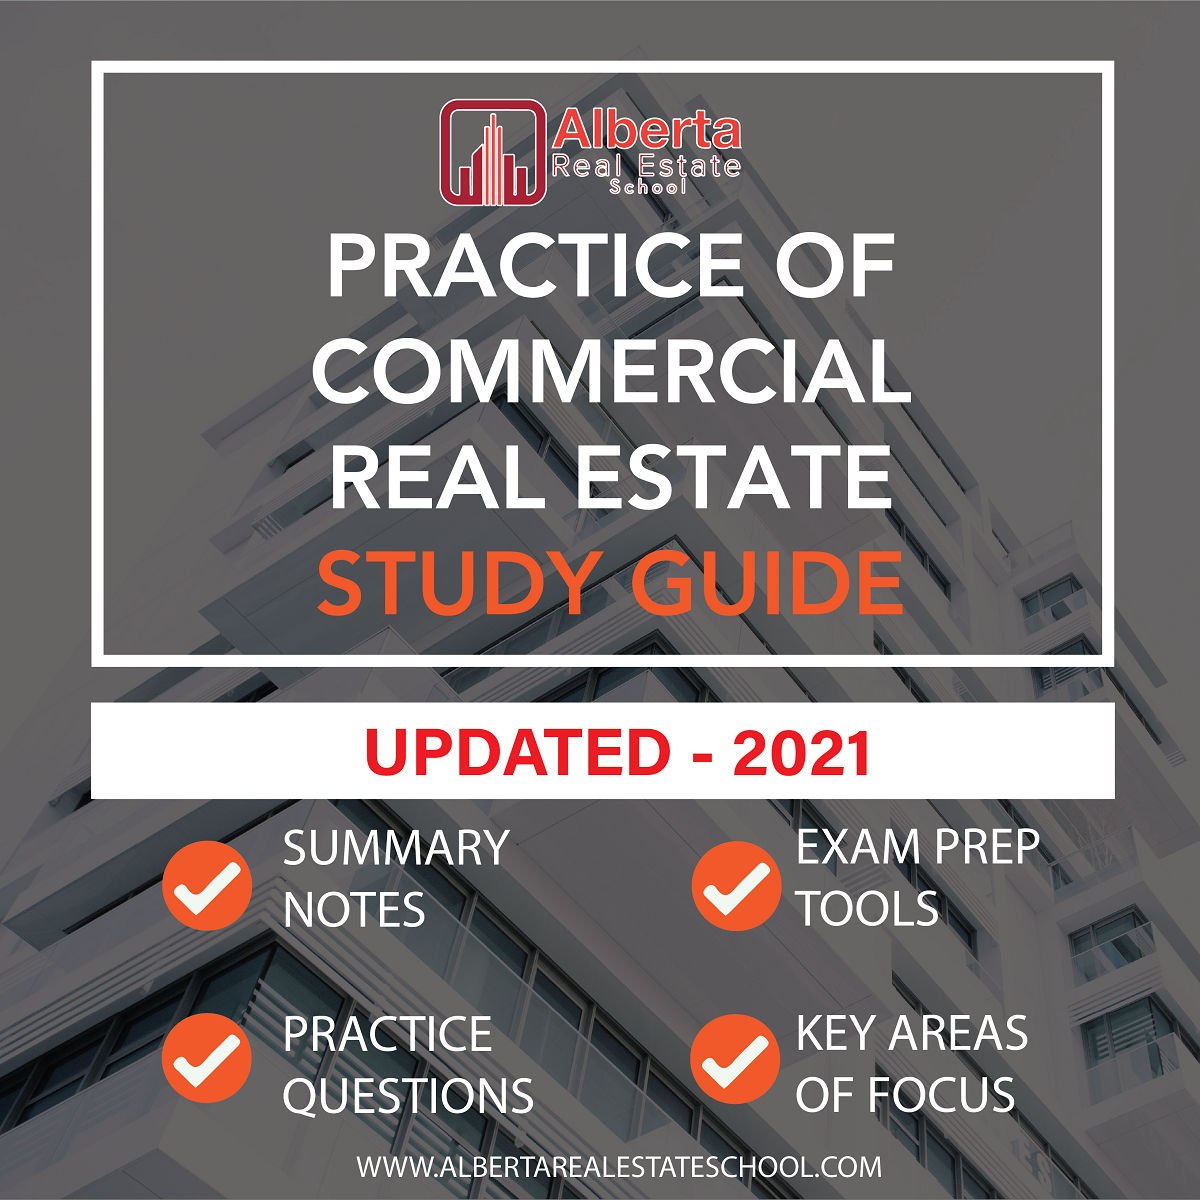 A study offering Practice of Commercial Real Estate Licensing in Alberta.